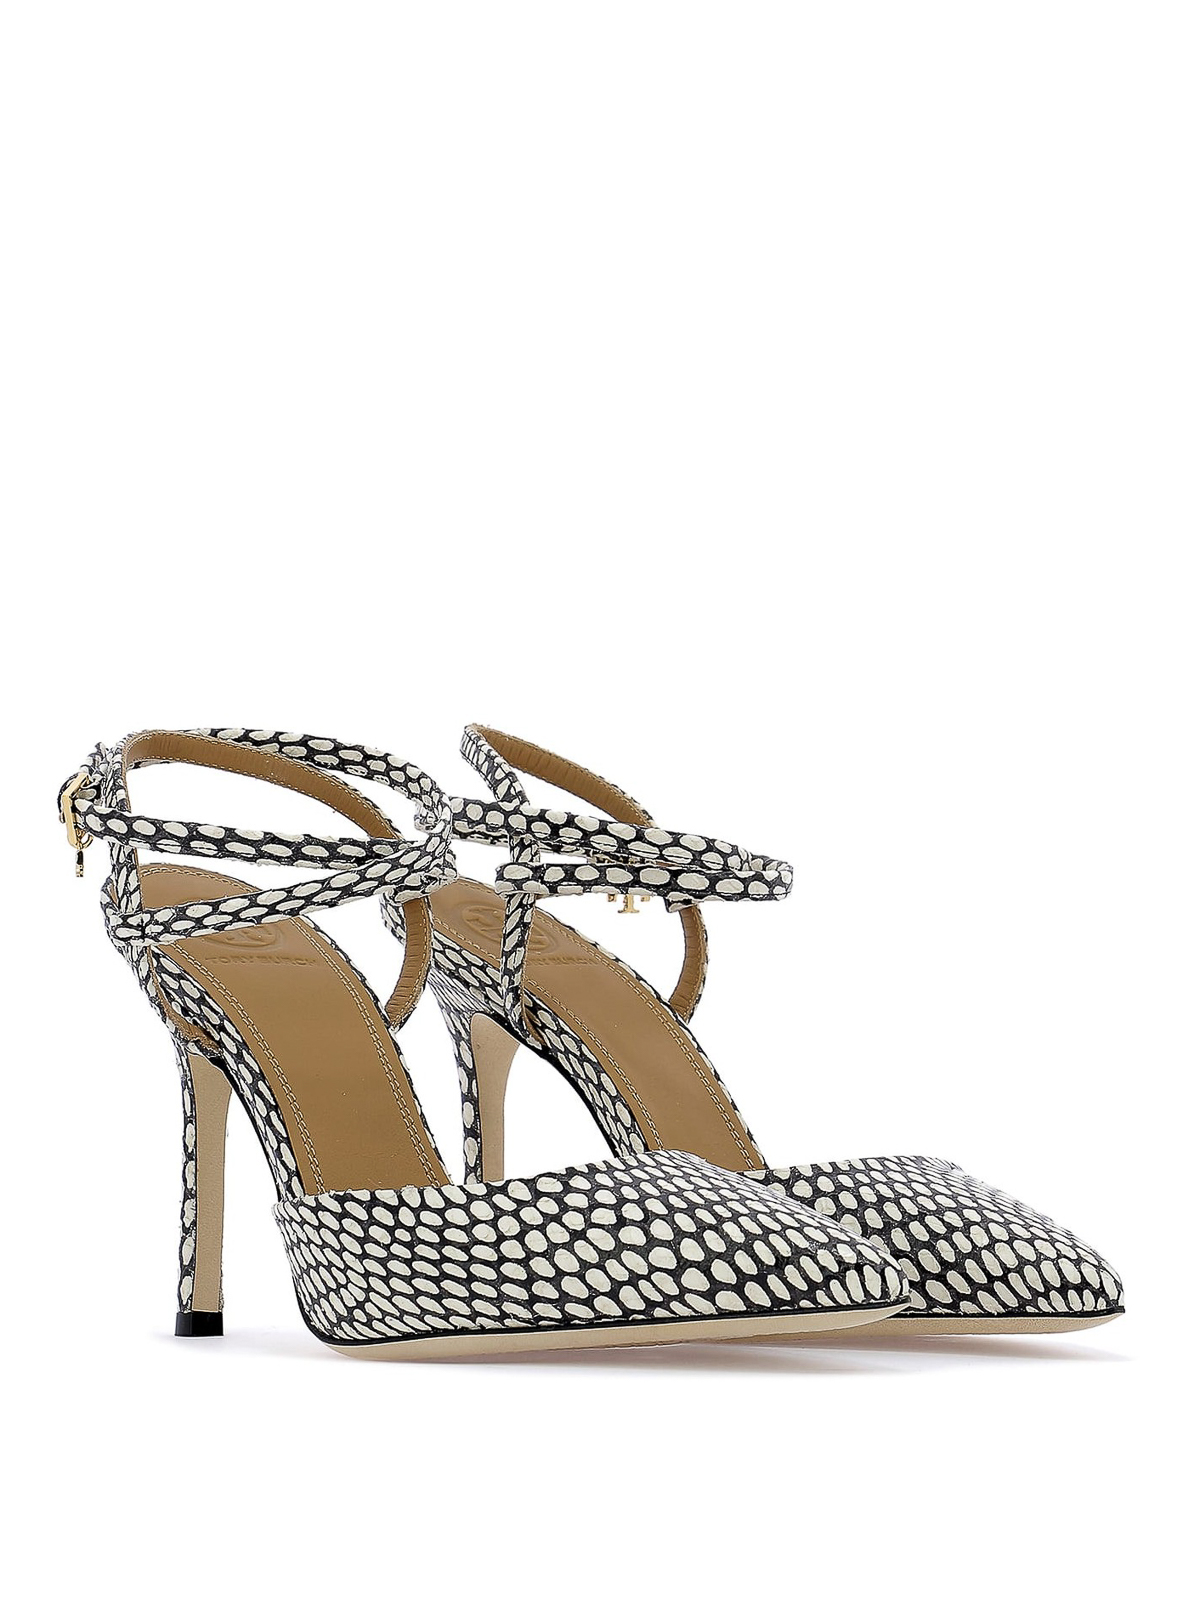 Court shoes Tory Burch - Two-tone snake print leather pumps - 53290014